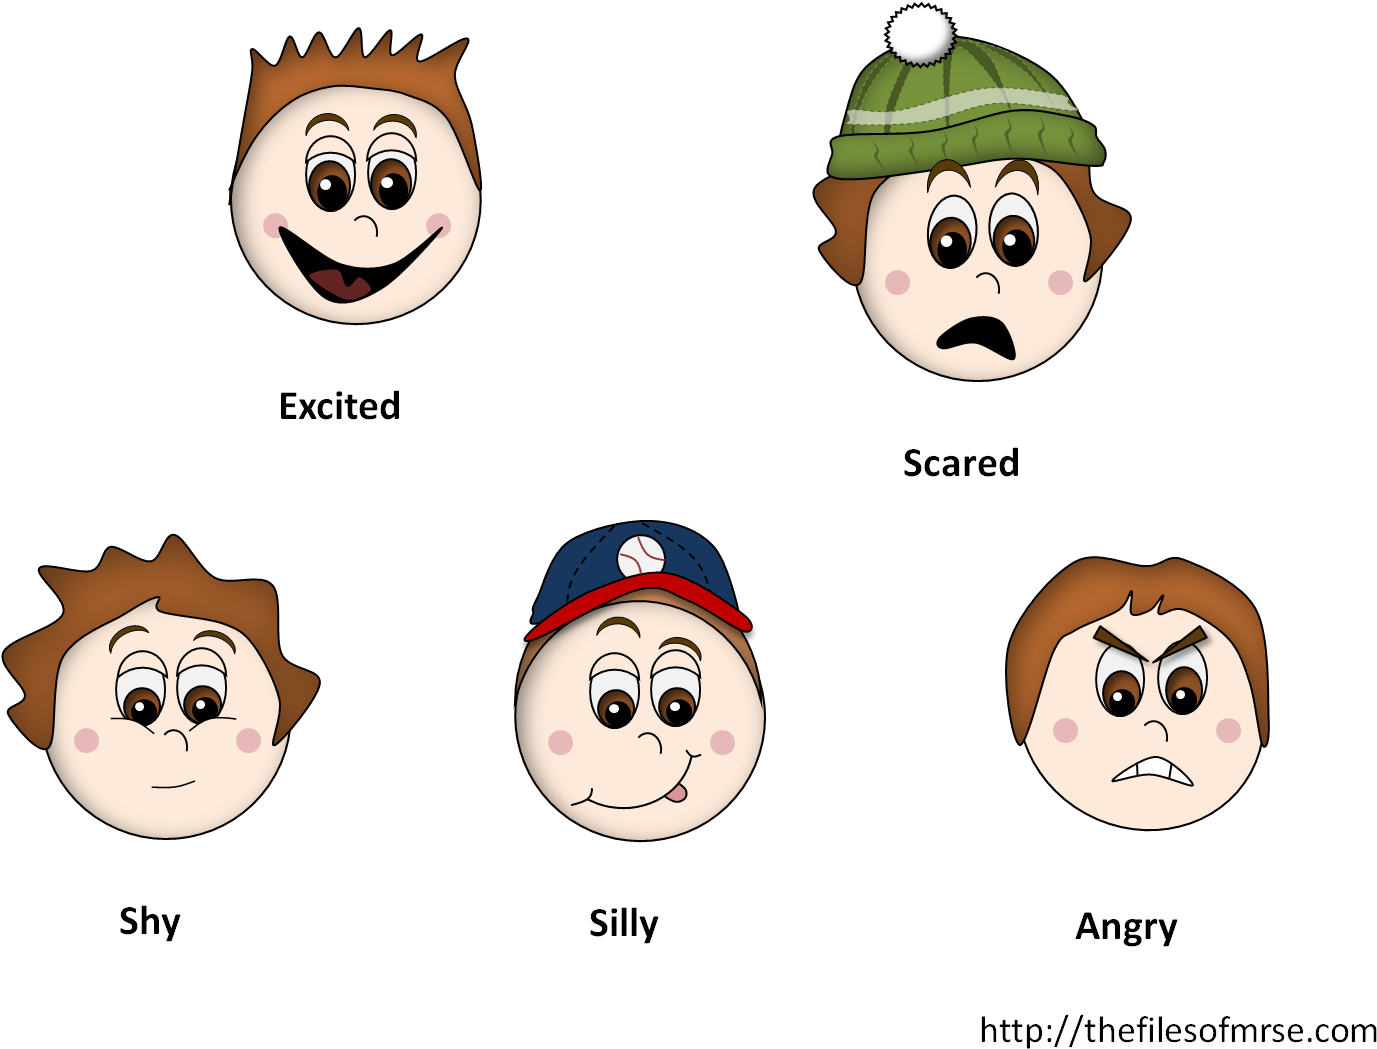 Feeling scared. Scared emotions for Kids. Feelings and emotions Clipart. Feelings Flashcards. Feeling frightened